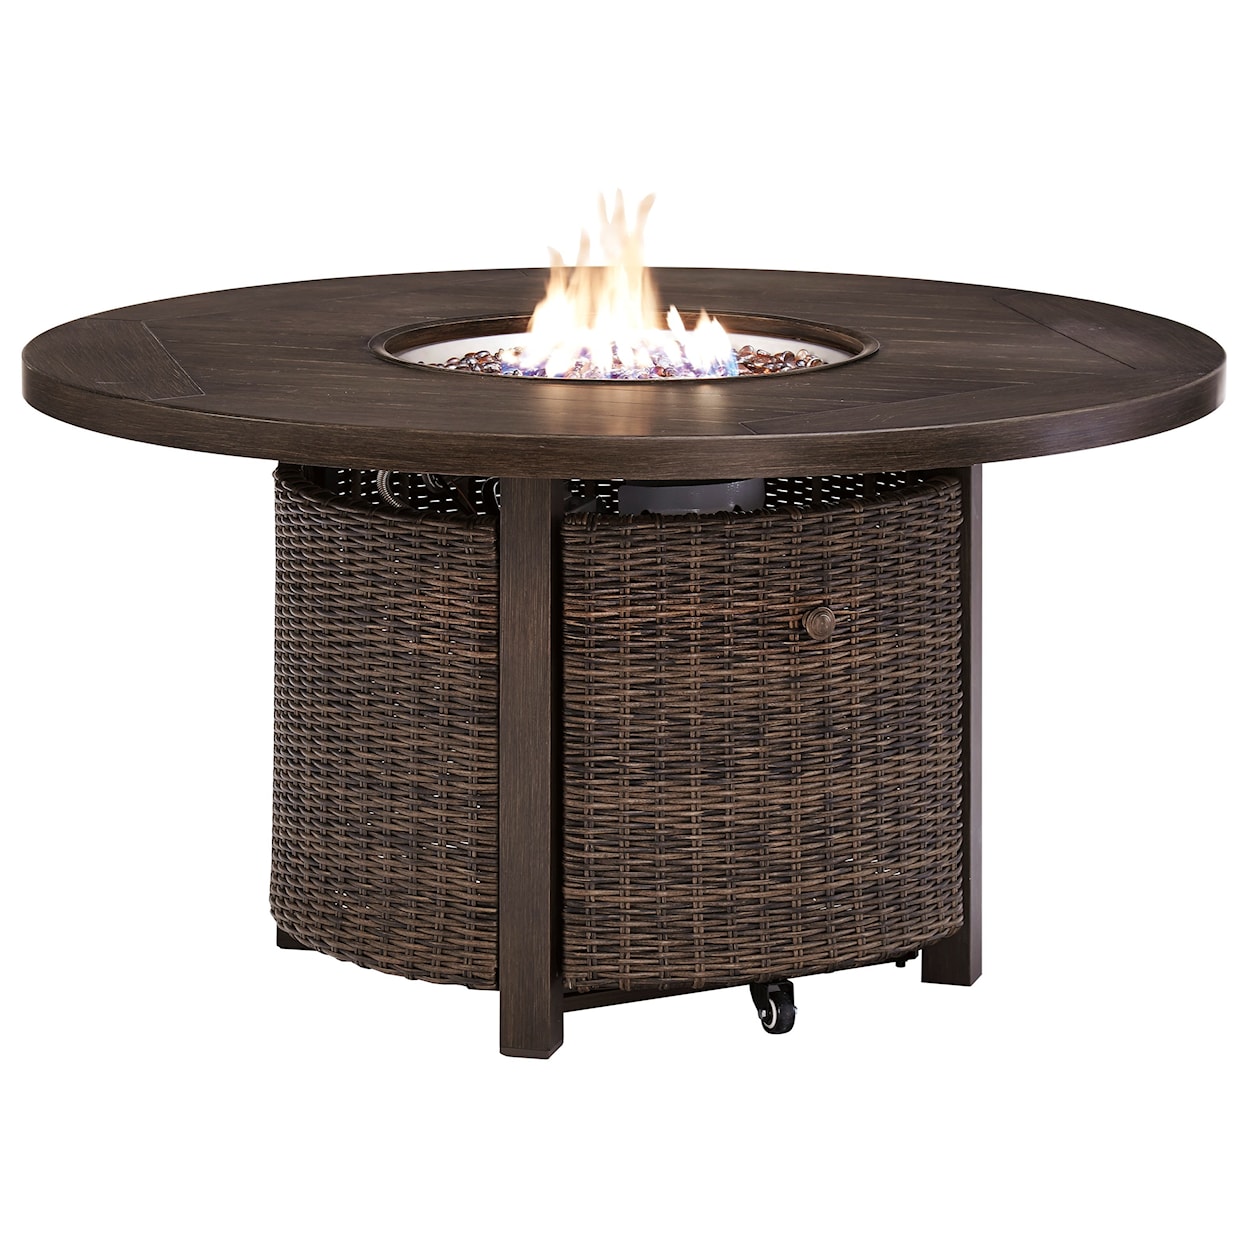 Signature Design by Ashley Paradise Trail Round Fire Pit Table